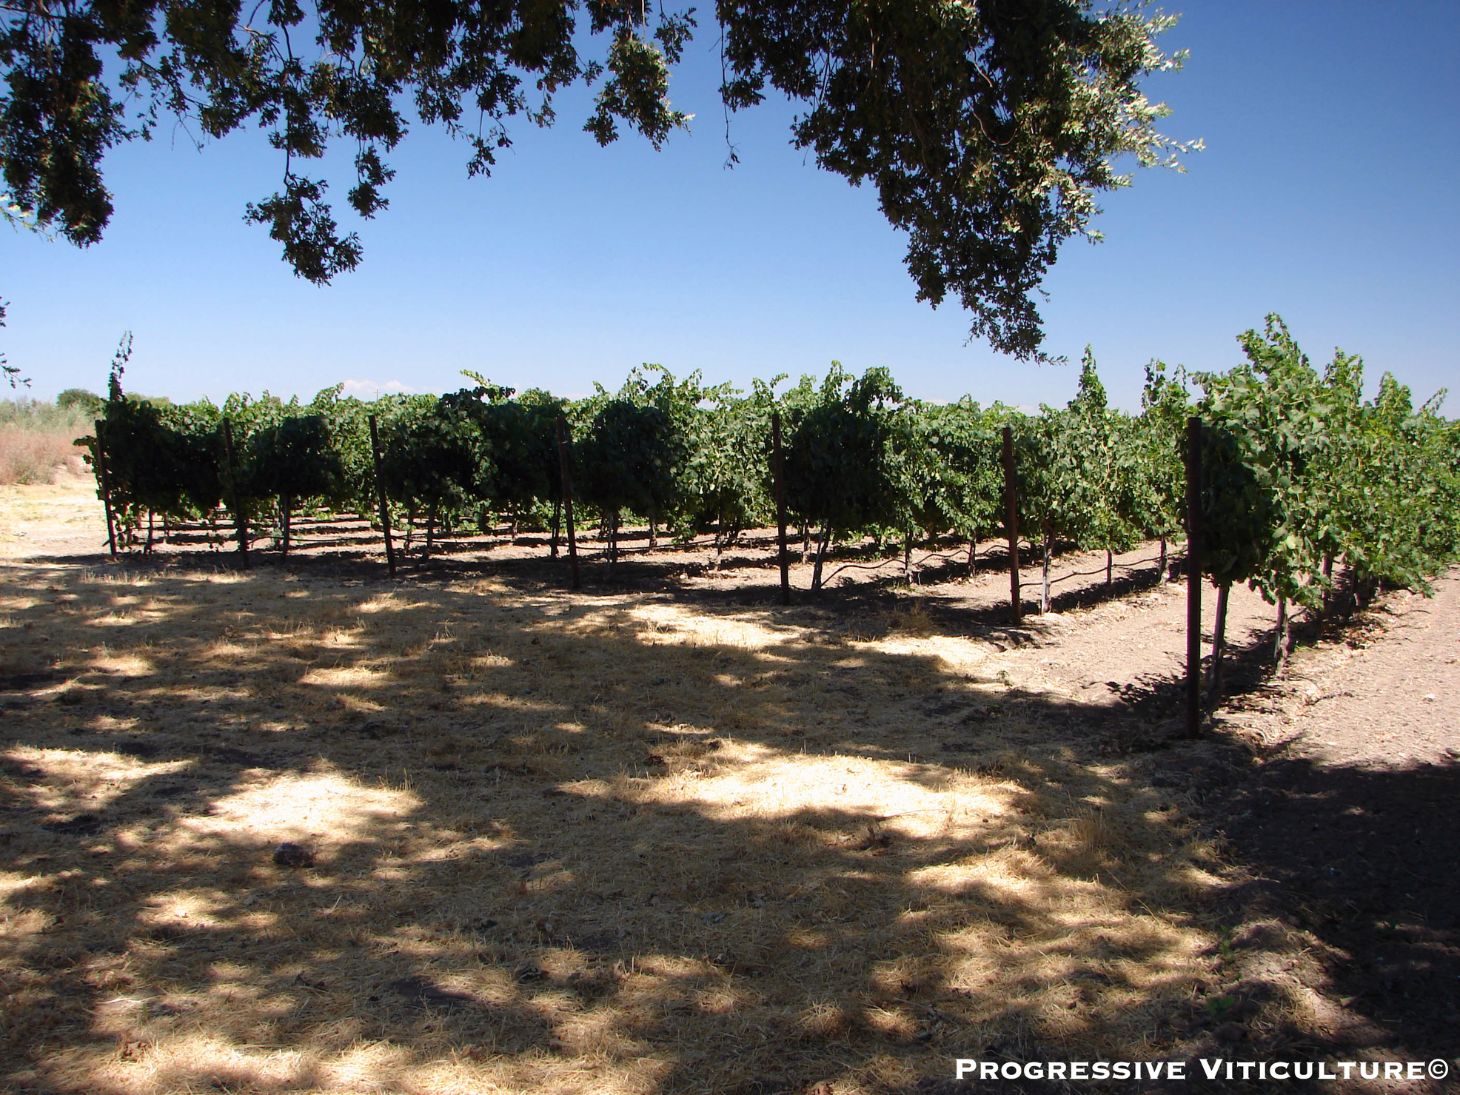 Figure 2.  Trees on vineyard periphery shade grapevines, reducing their photosynthetic output. (Progressive Viticulture©)